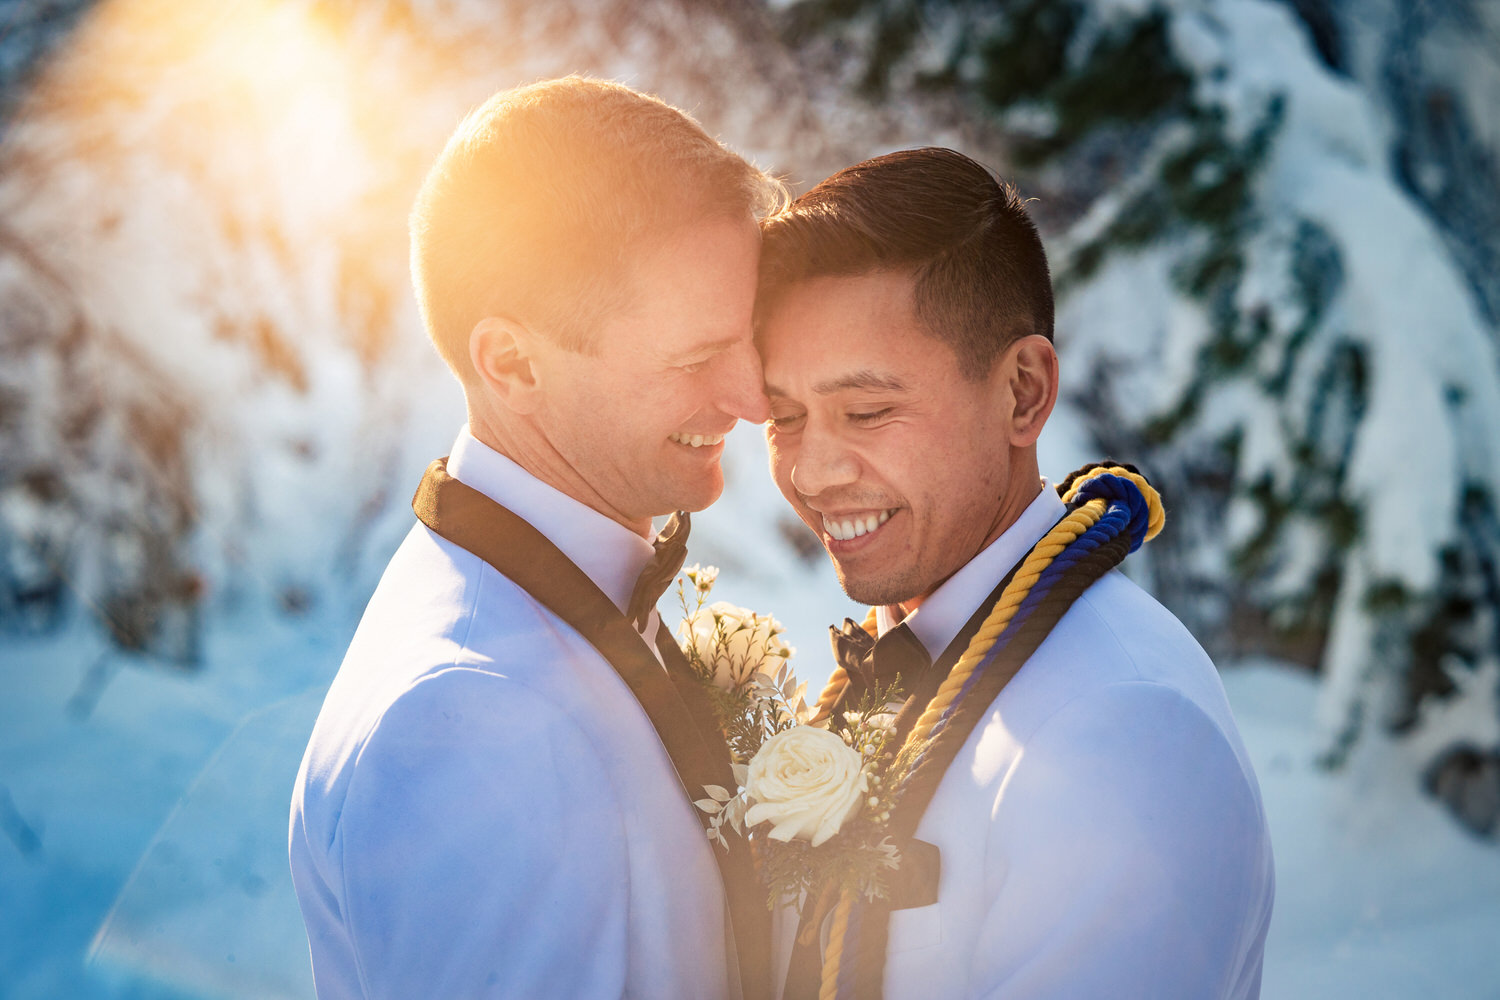 Sunset portrait in winter of two grooms wearing white tuxedos.